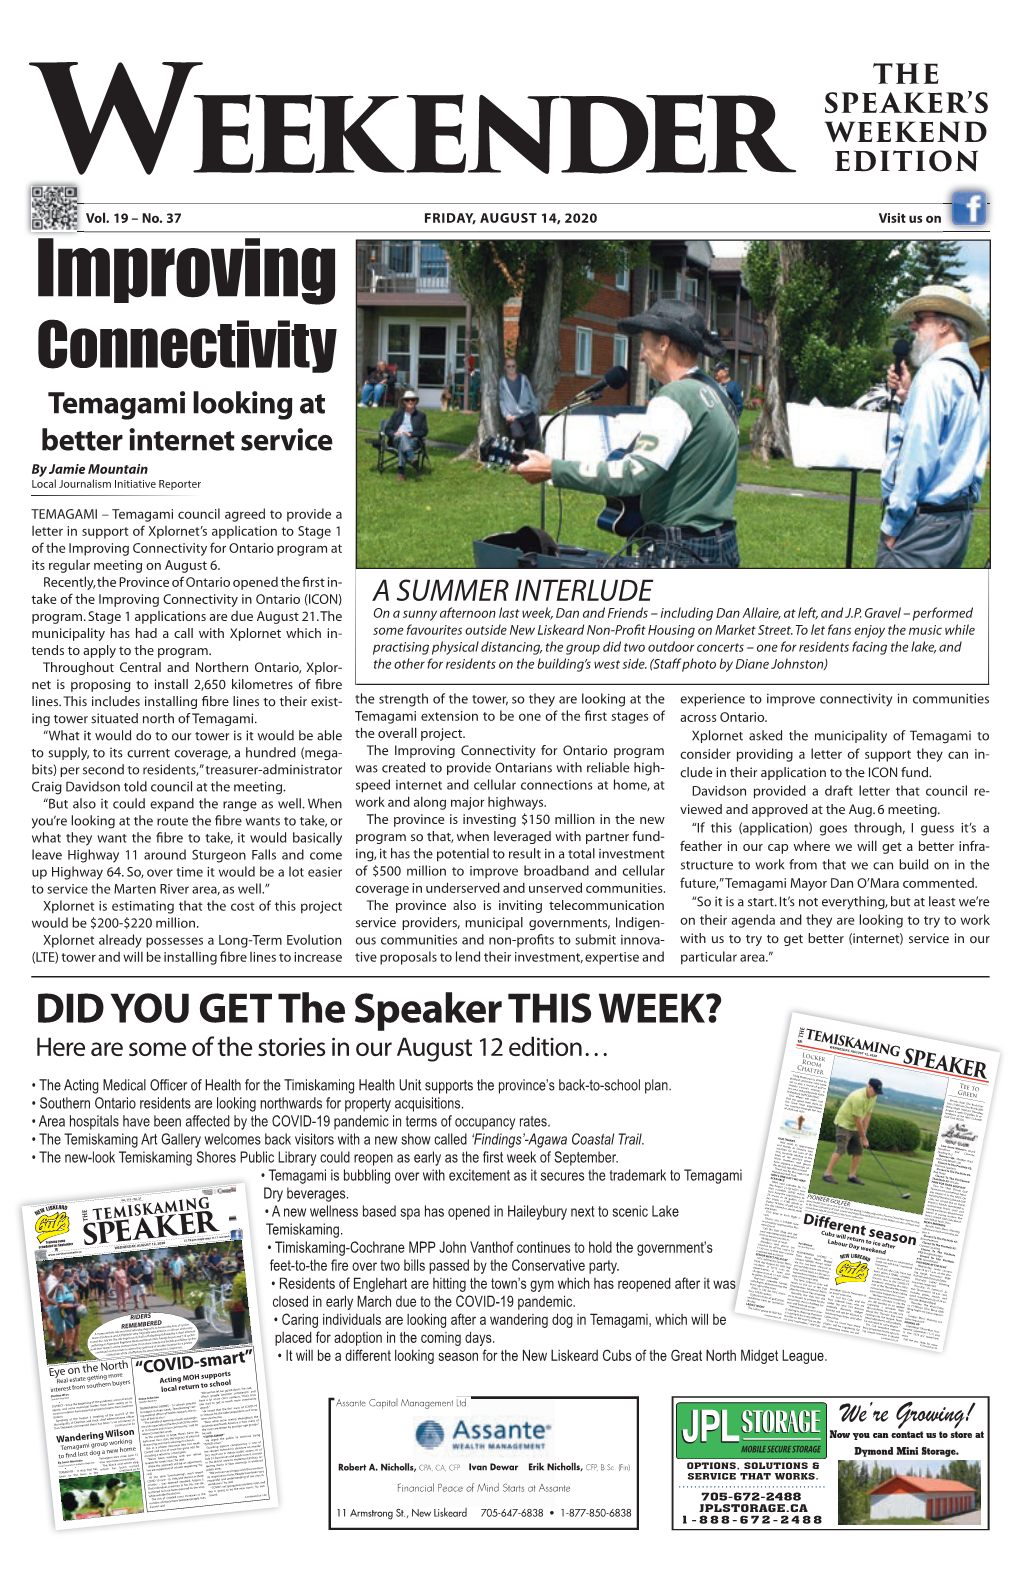 Improving Connectivity Temagami Looking at Better Internet Service by Jamie Mountain Local Journalism Initiative Reporter